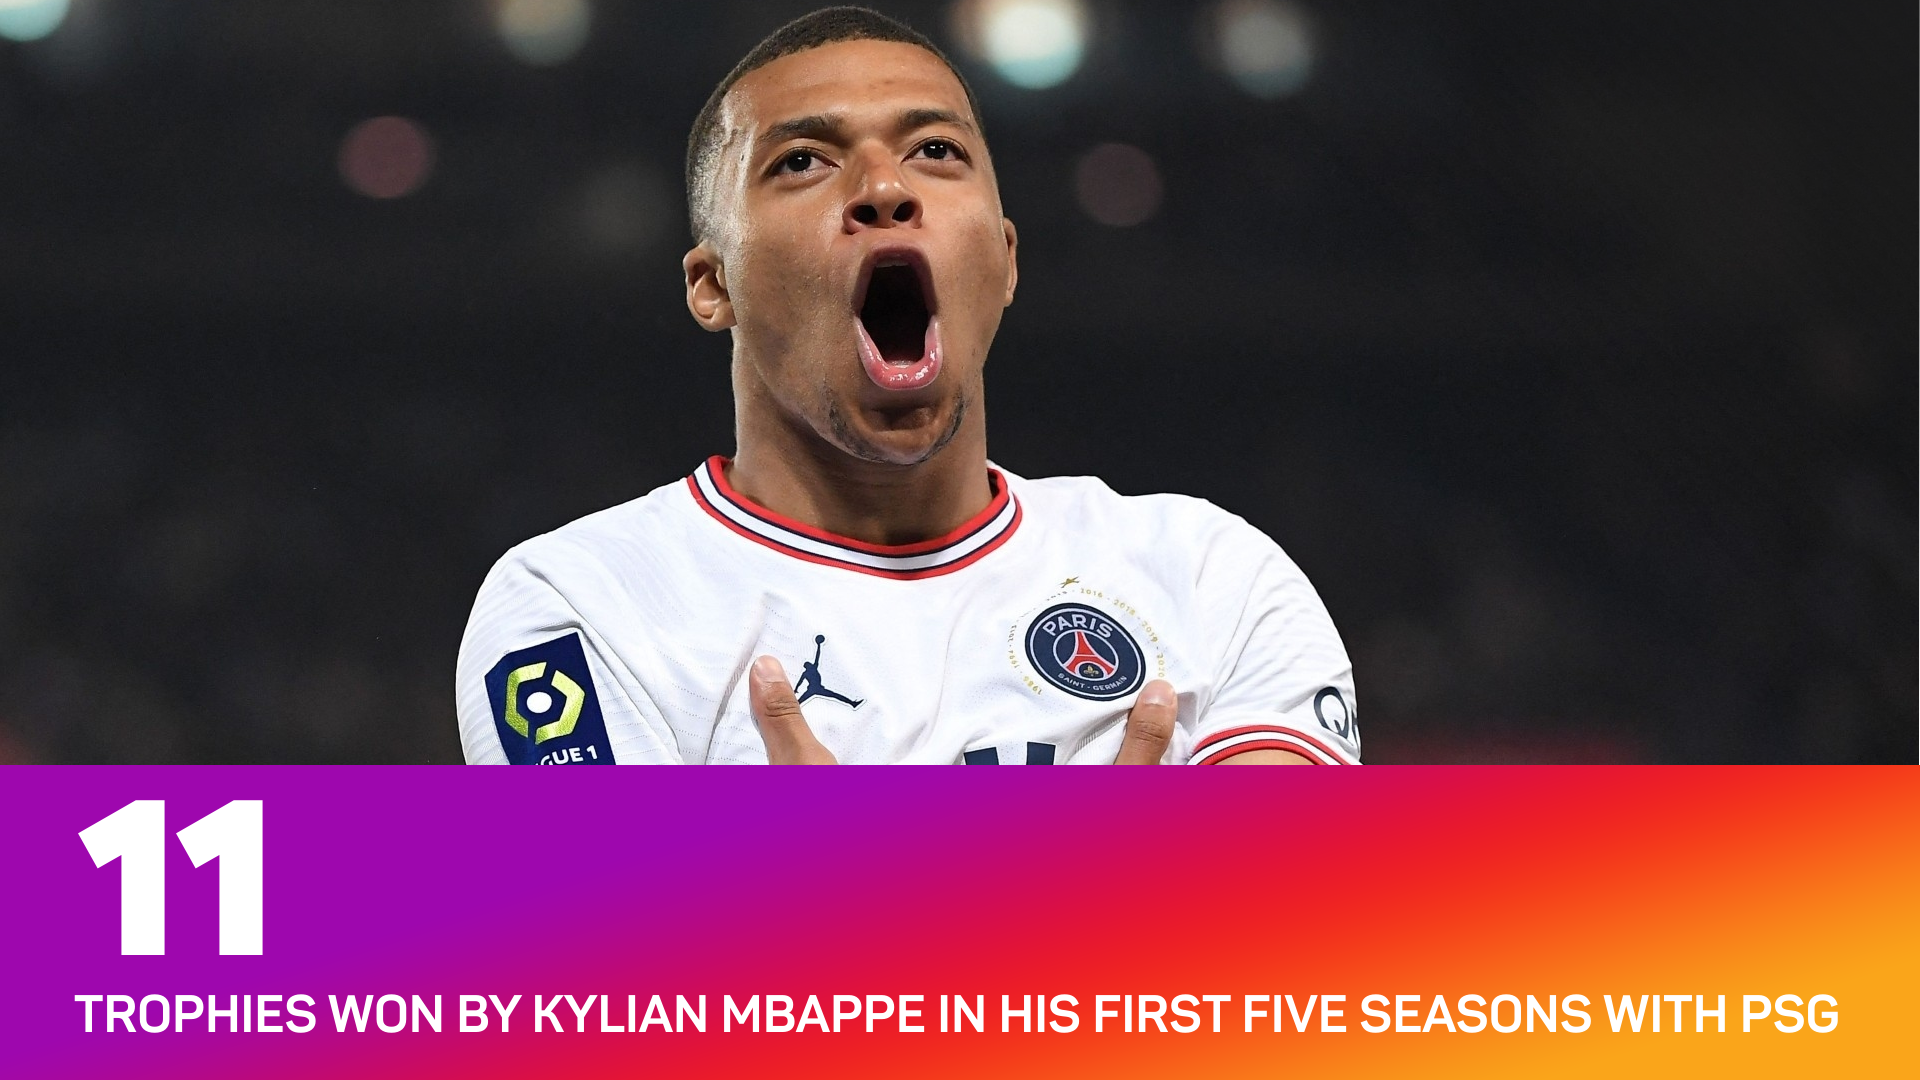 Kylian Mbappe has won 11 trophies at PSG